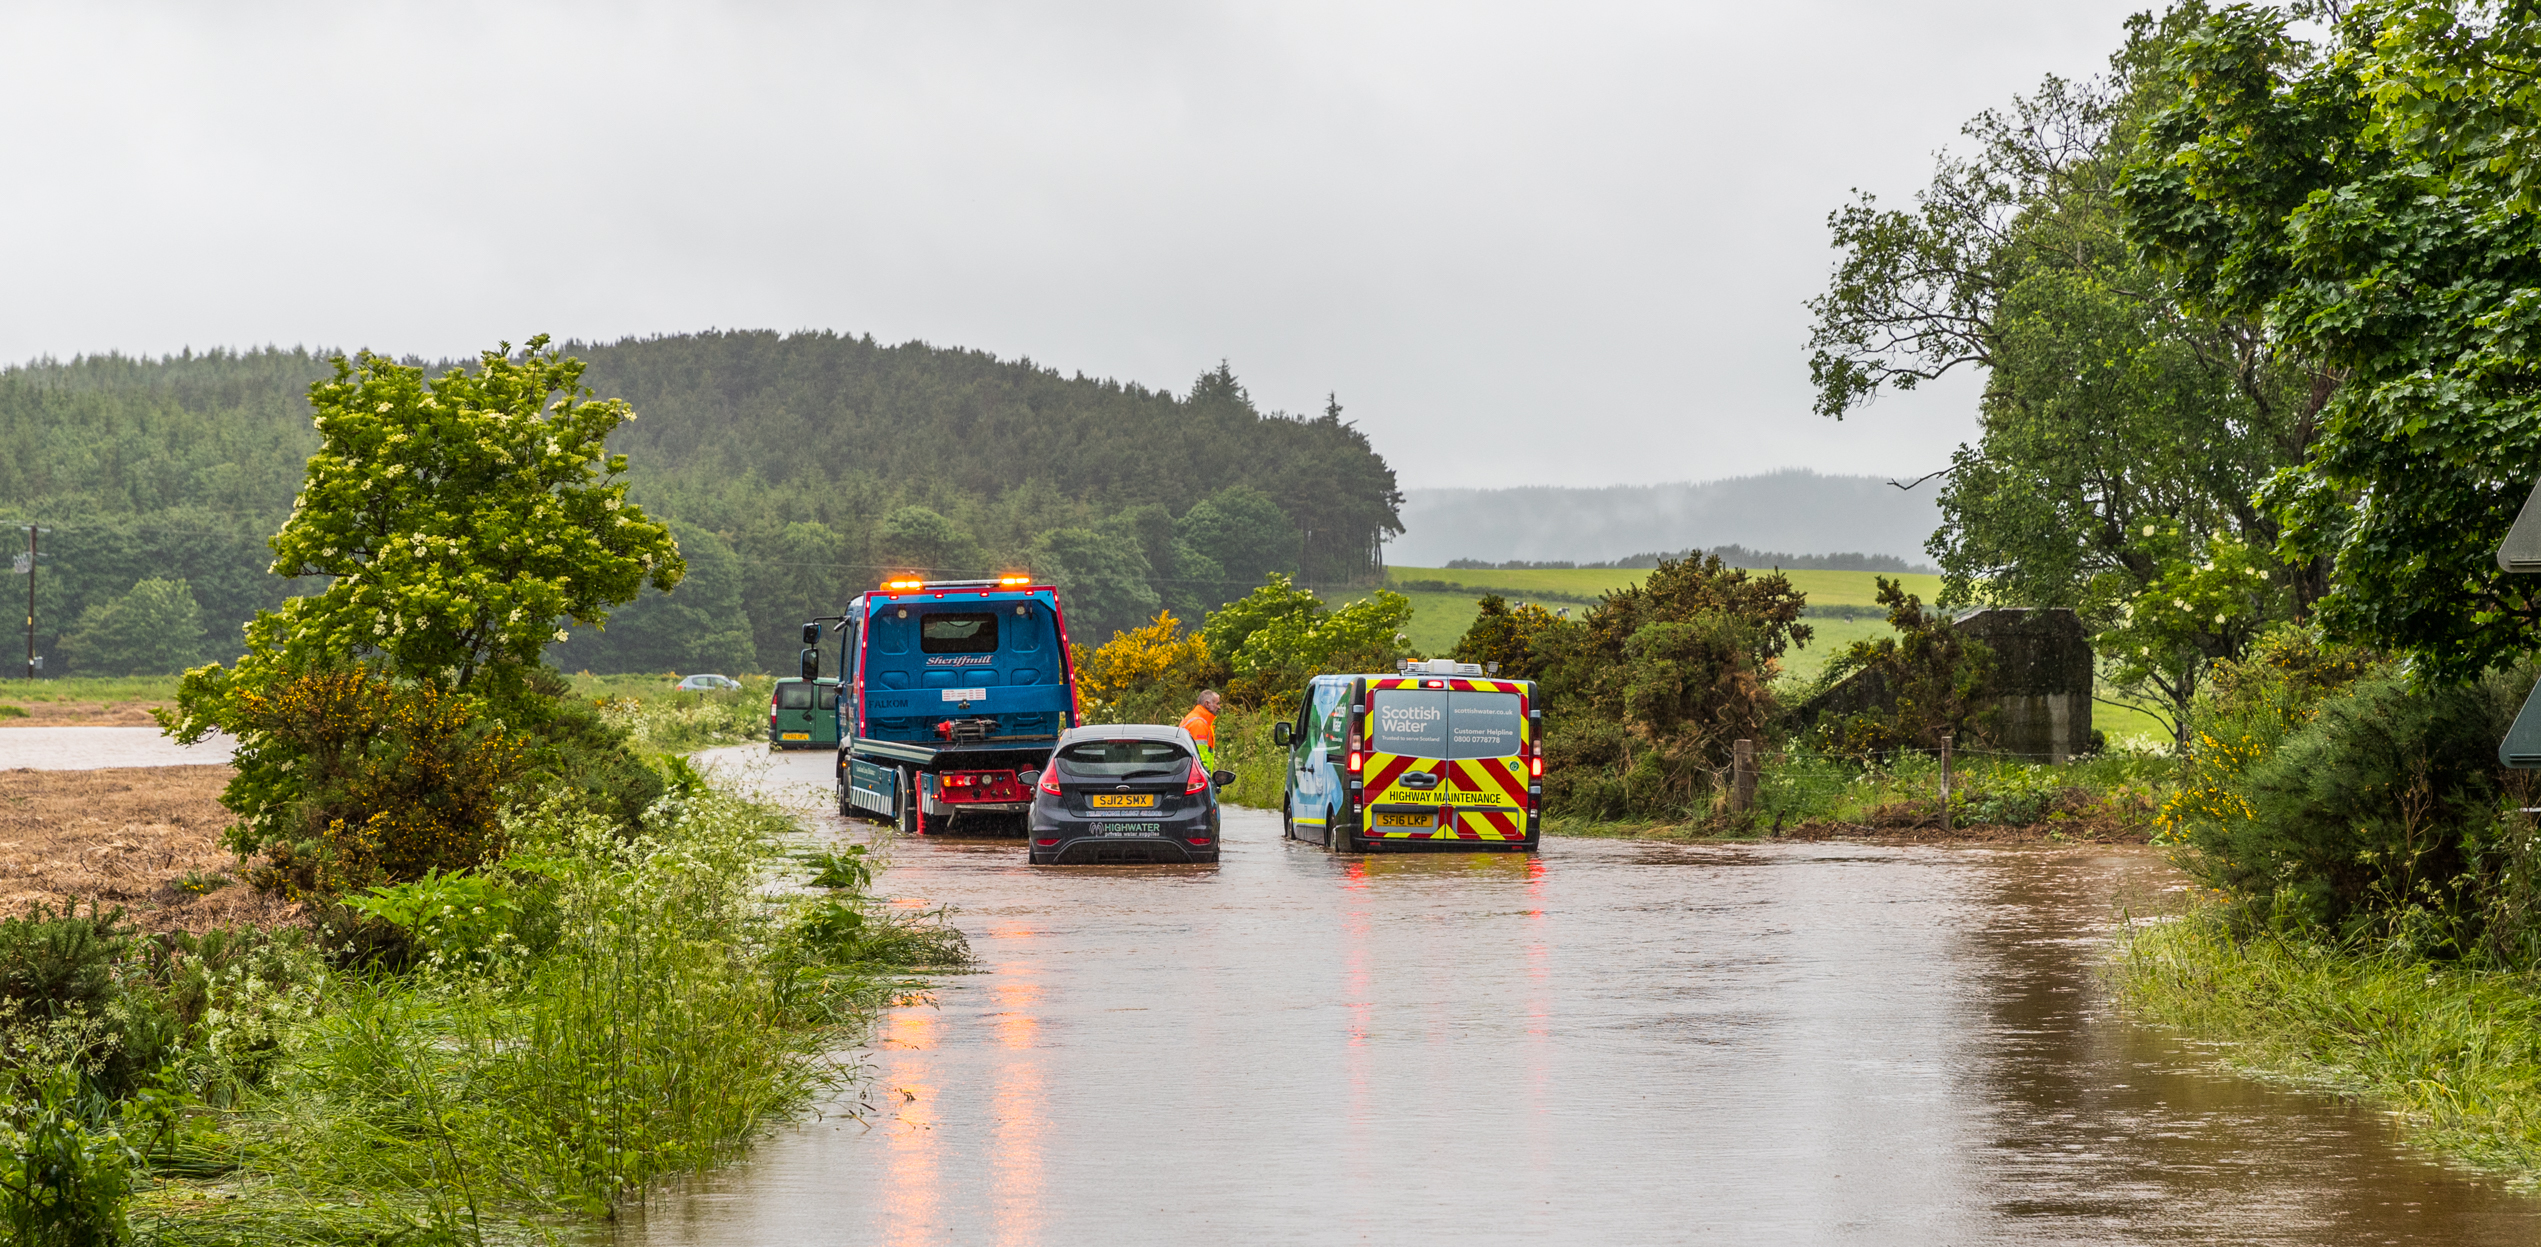 This is the unclassified road near Cloddach just outside Elgin, car has broken down in the flood.